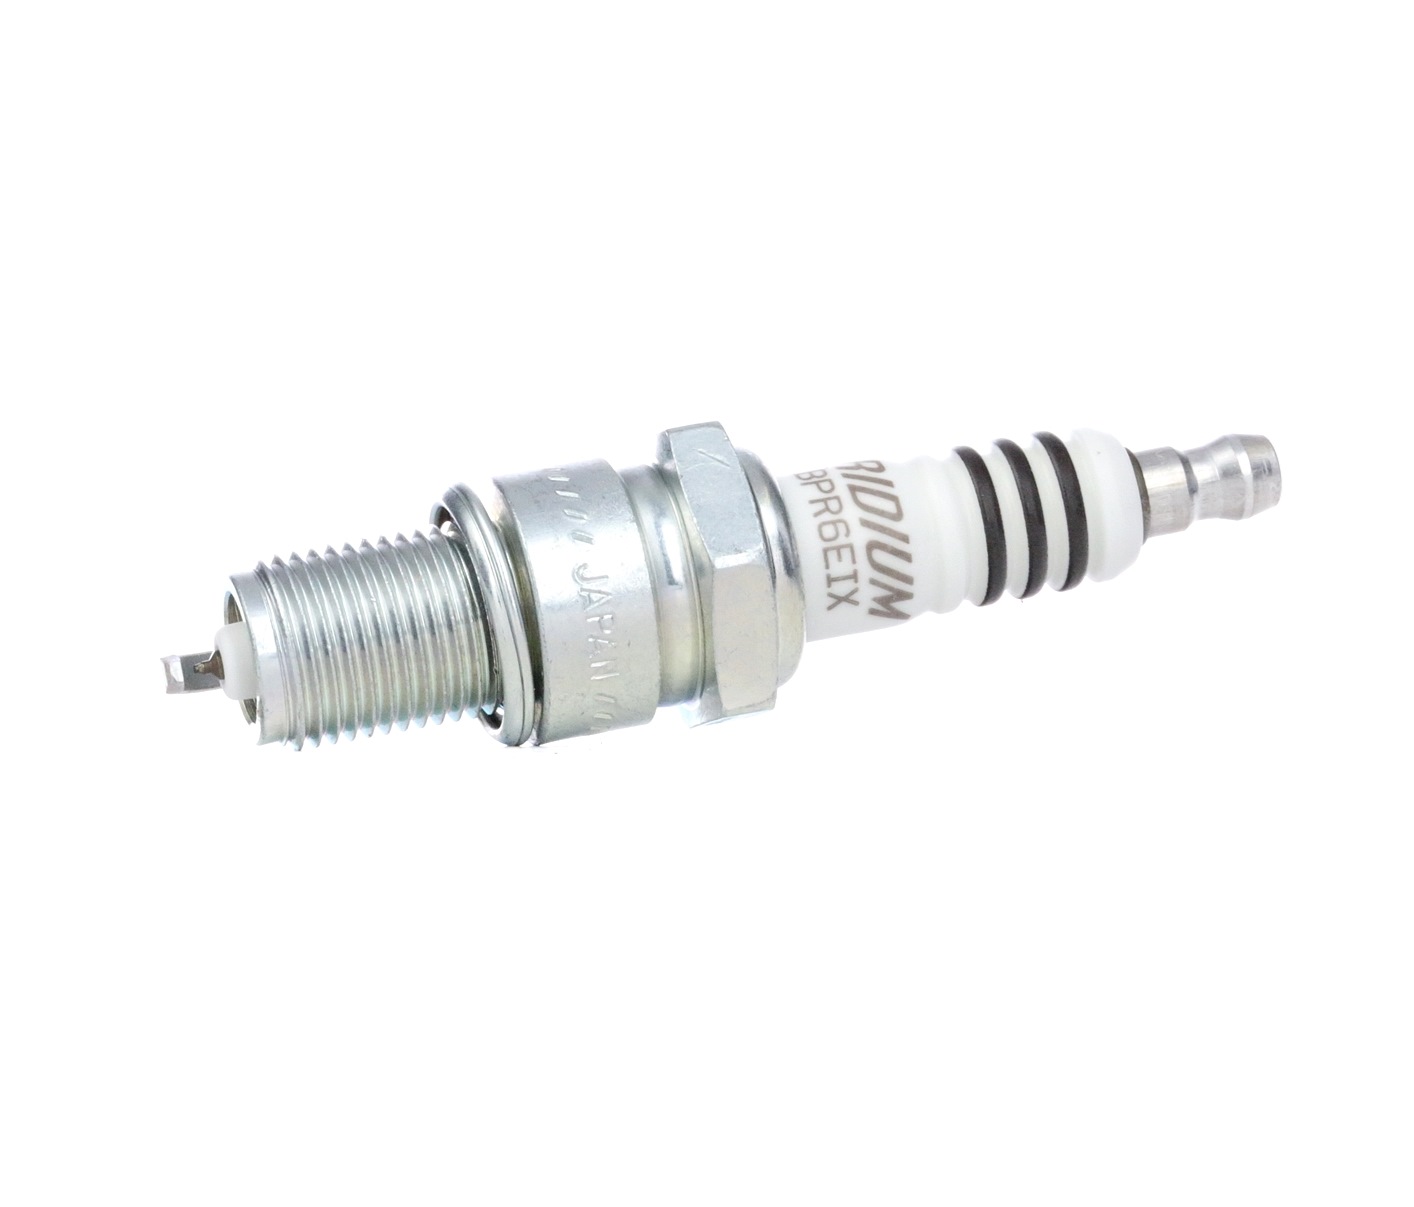 NGK 6637 Spark plug cheap in online store